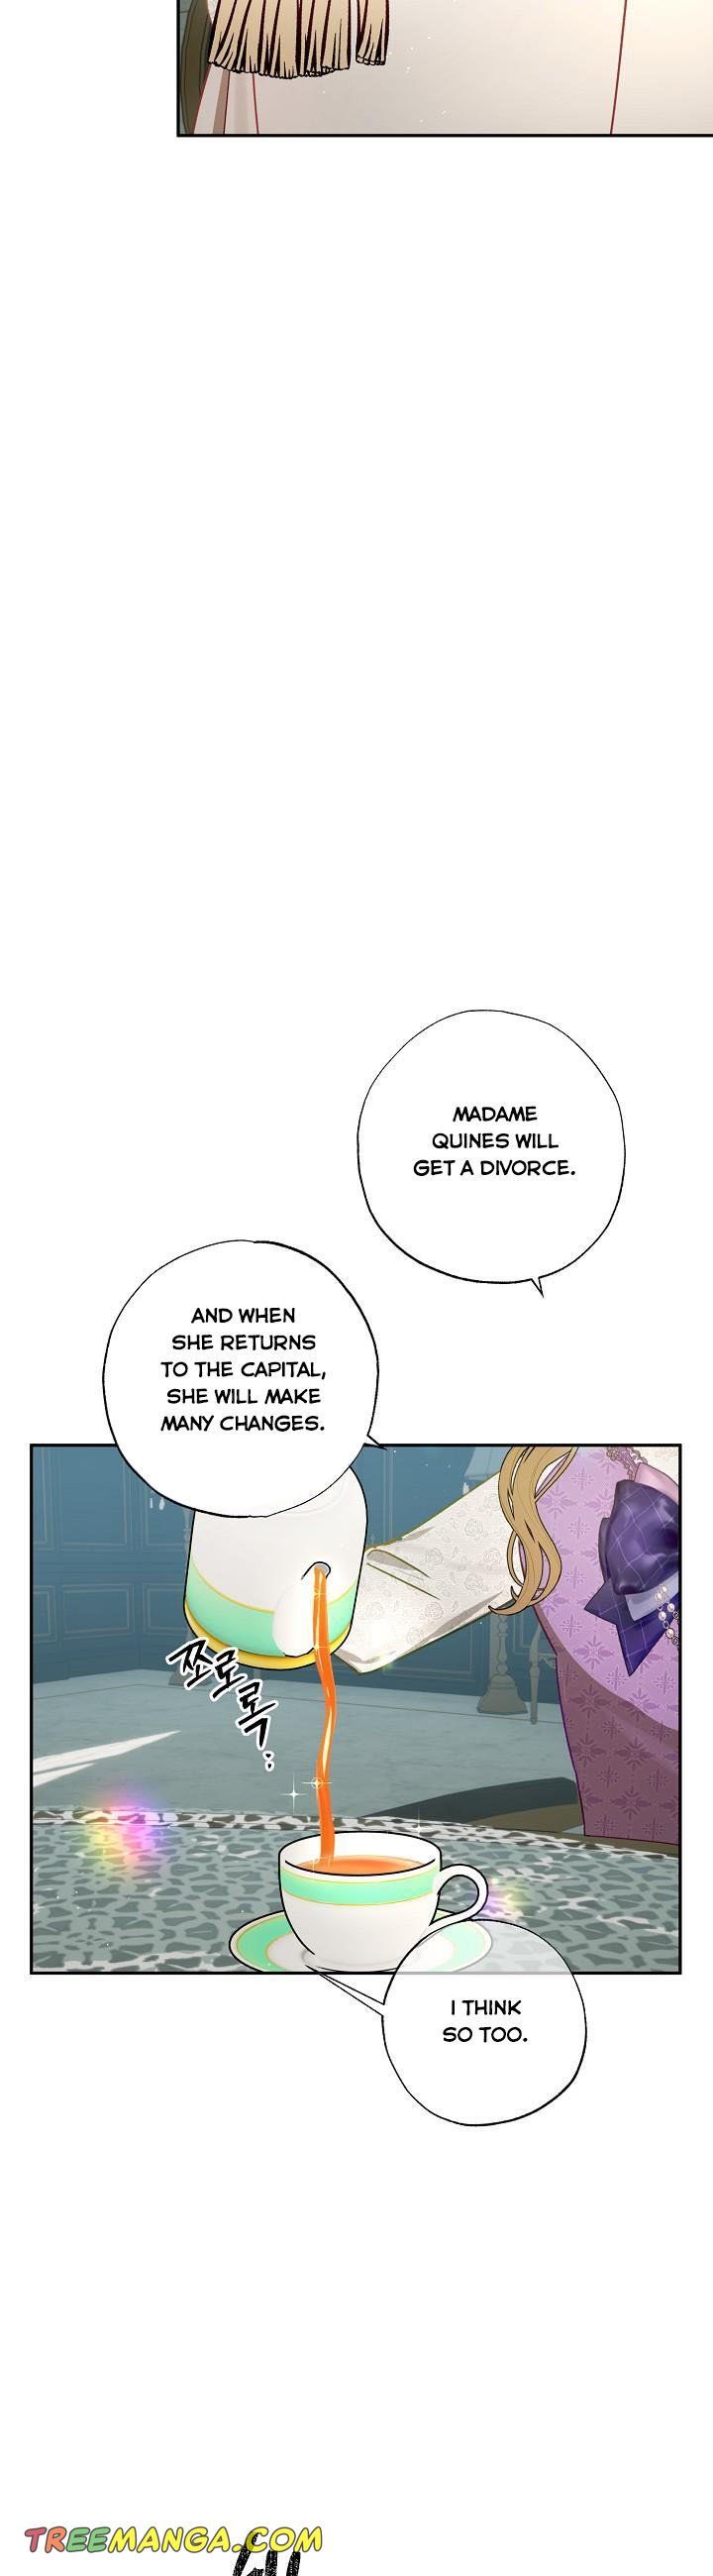 I am Afraid I have Failed to Divorce Chapter 50 page 31